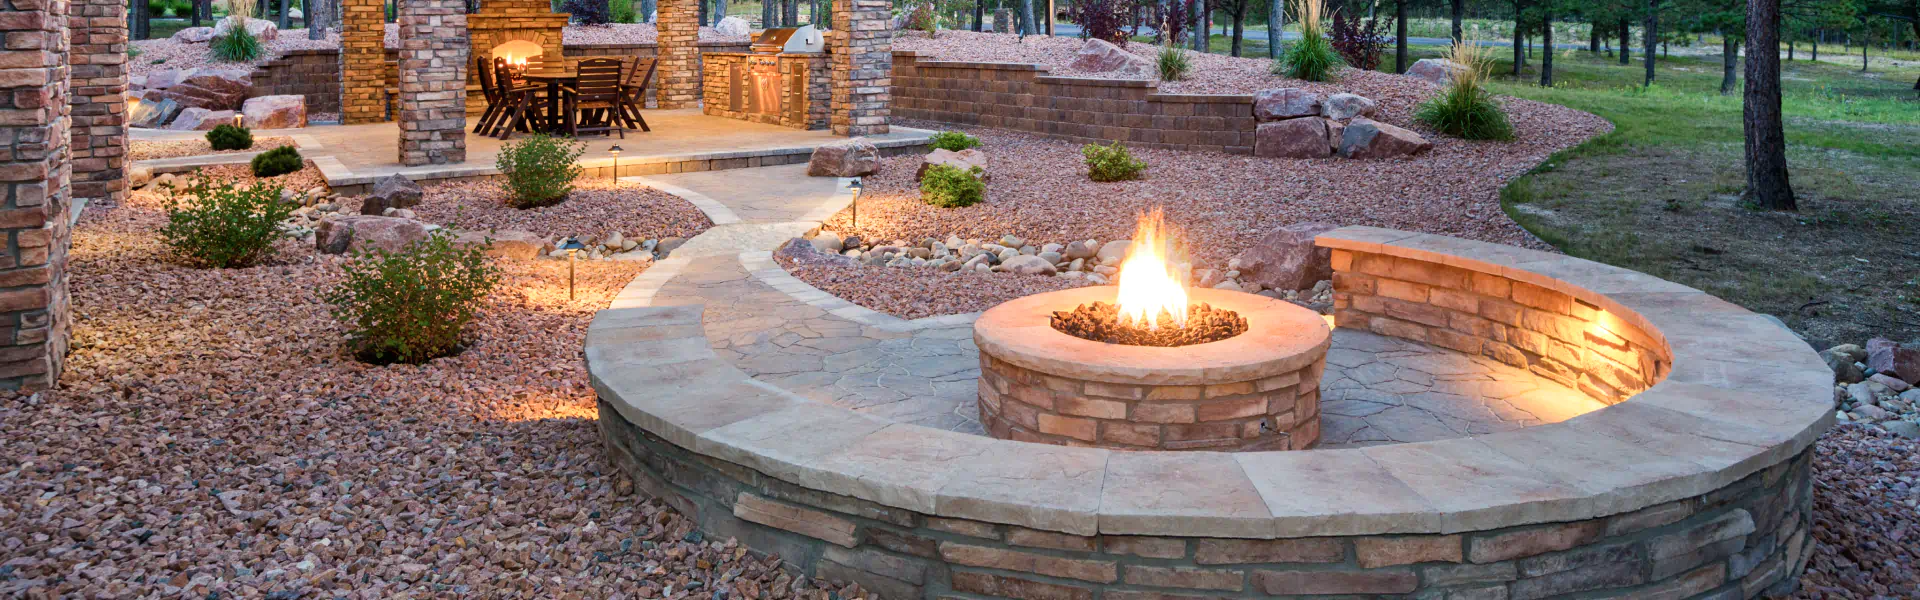 outdoor masonry fireplace and landscape